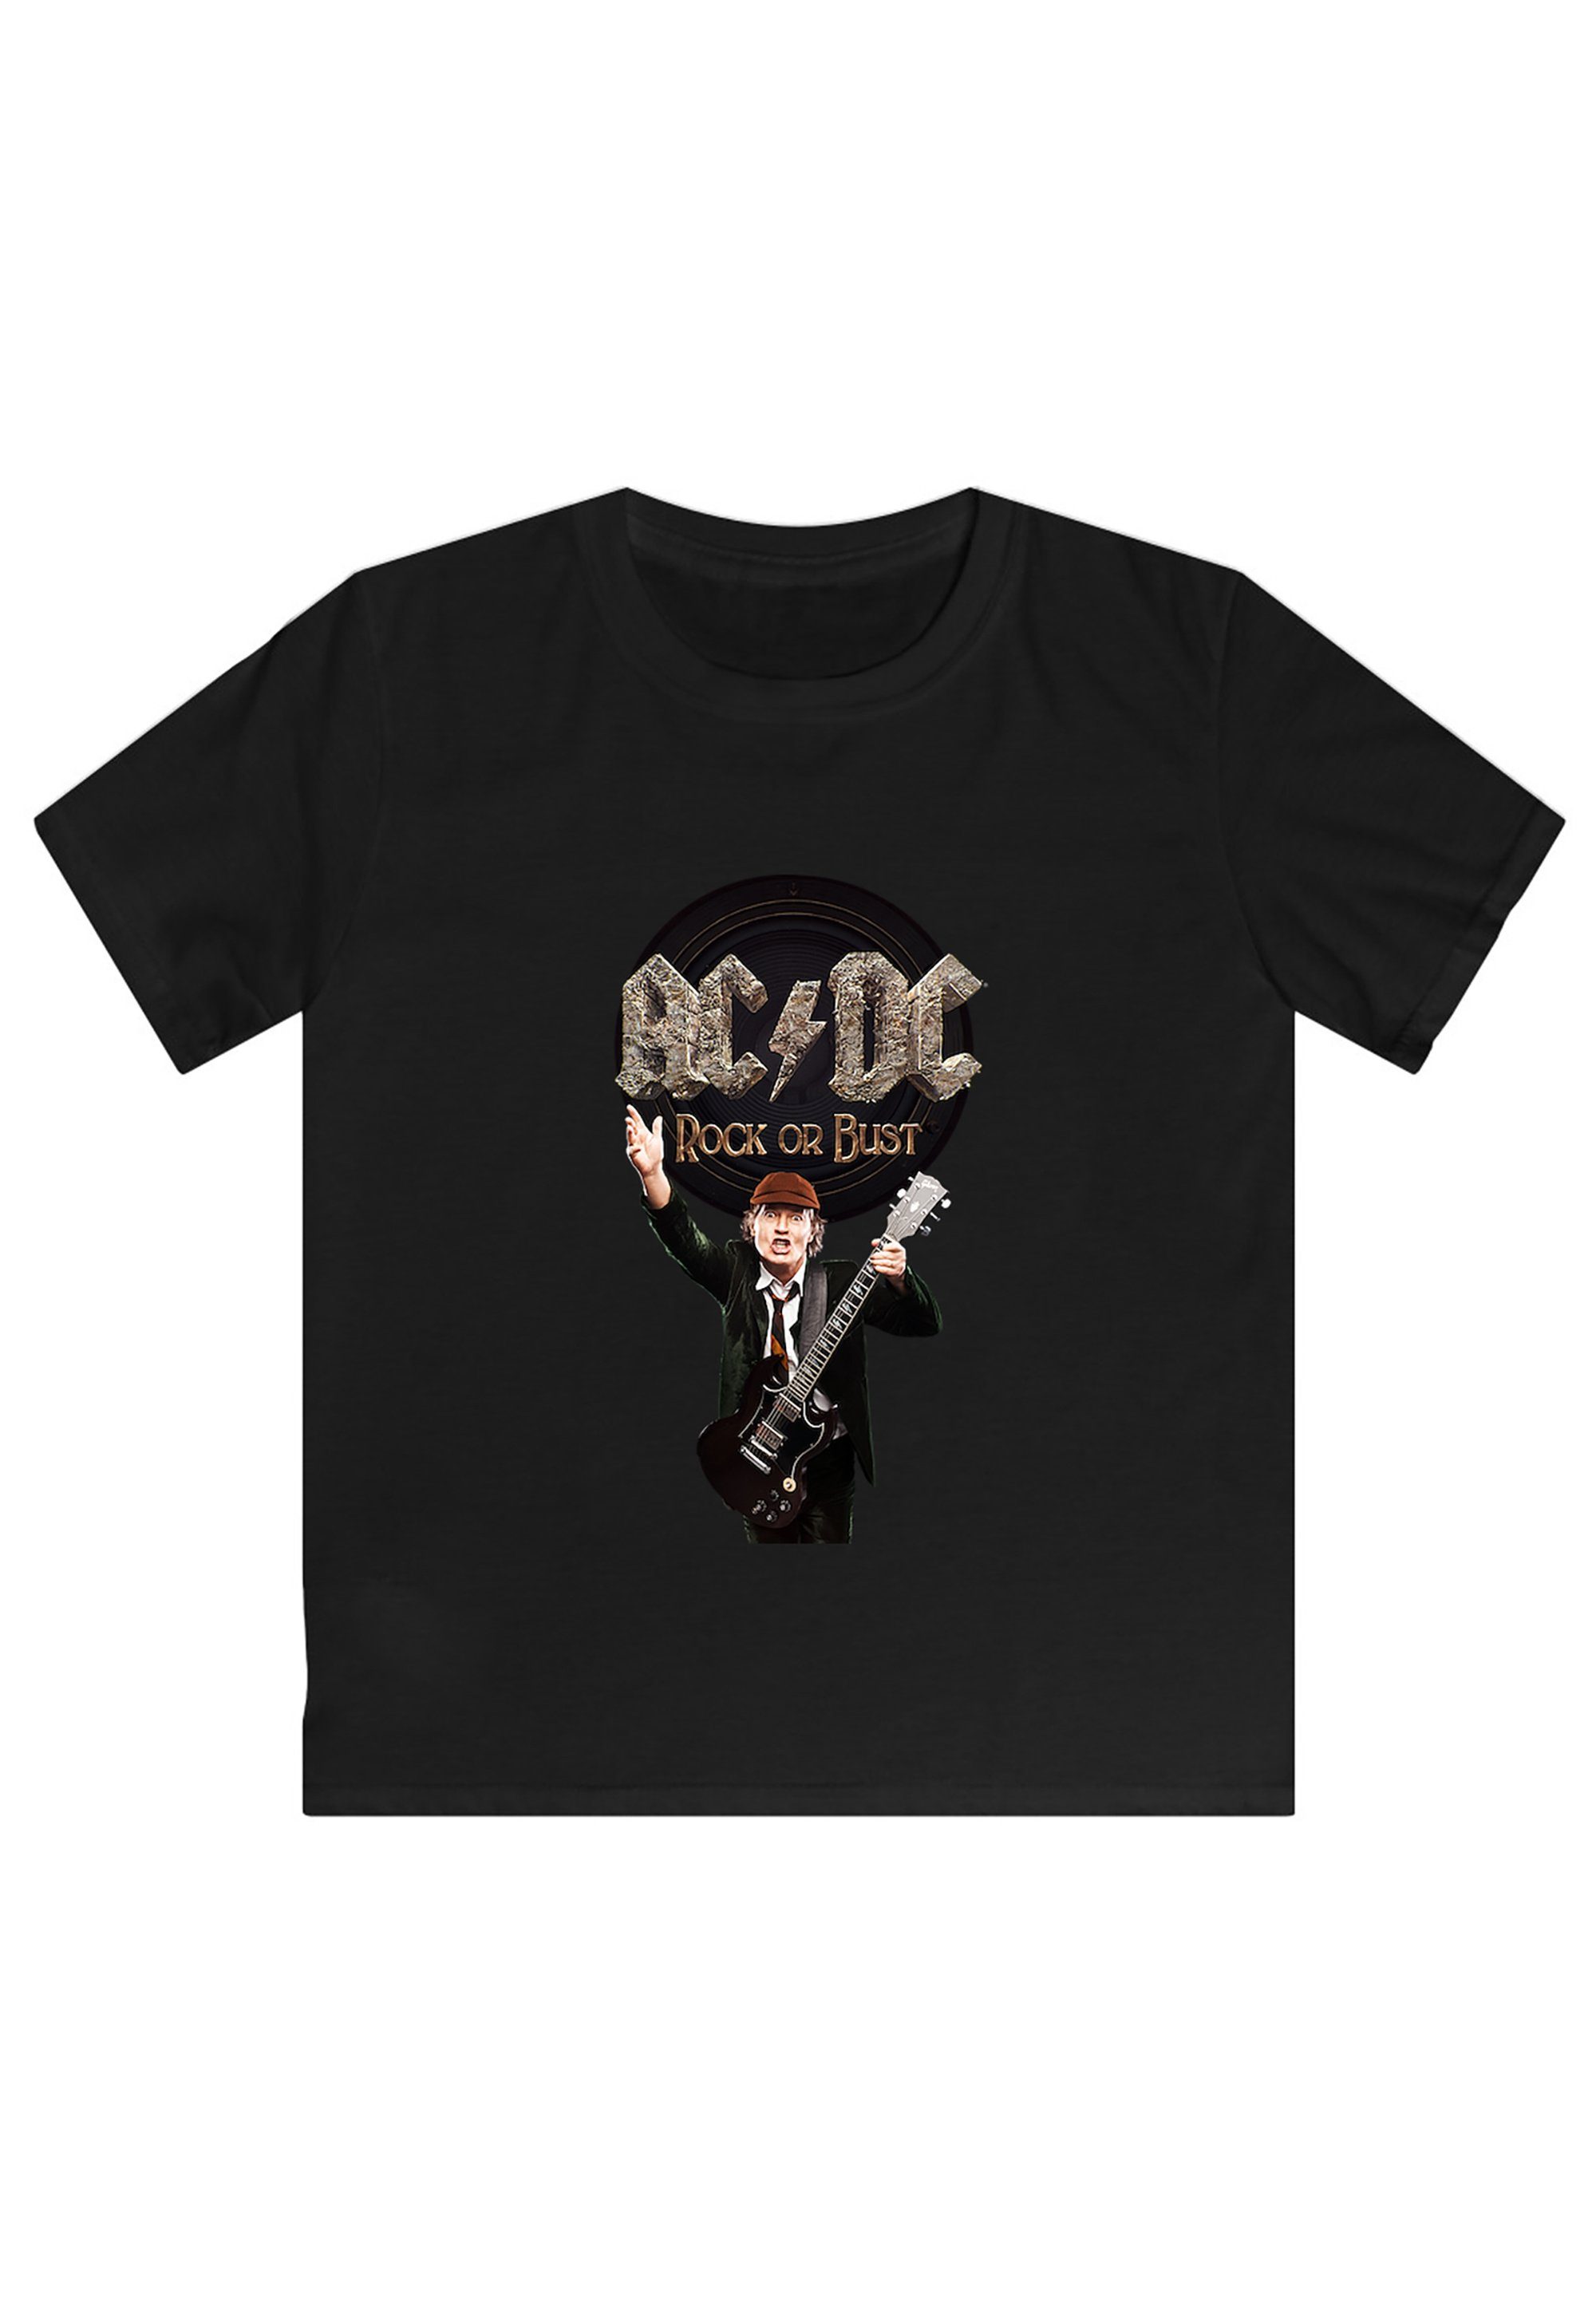 F4NT4STIC T-Shirt ACDC Kinder Herren Print Angus & Bust Rock Young Or für